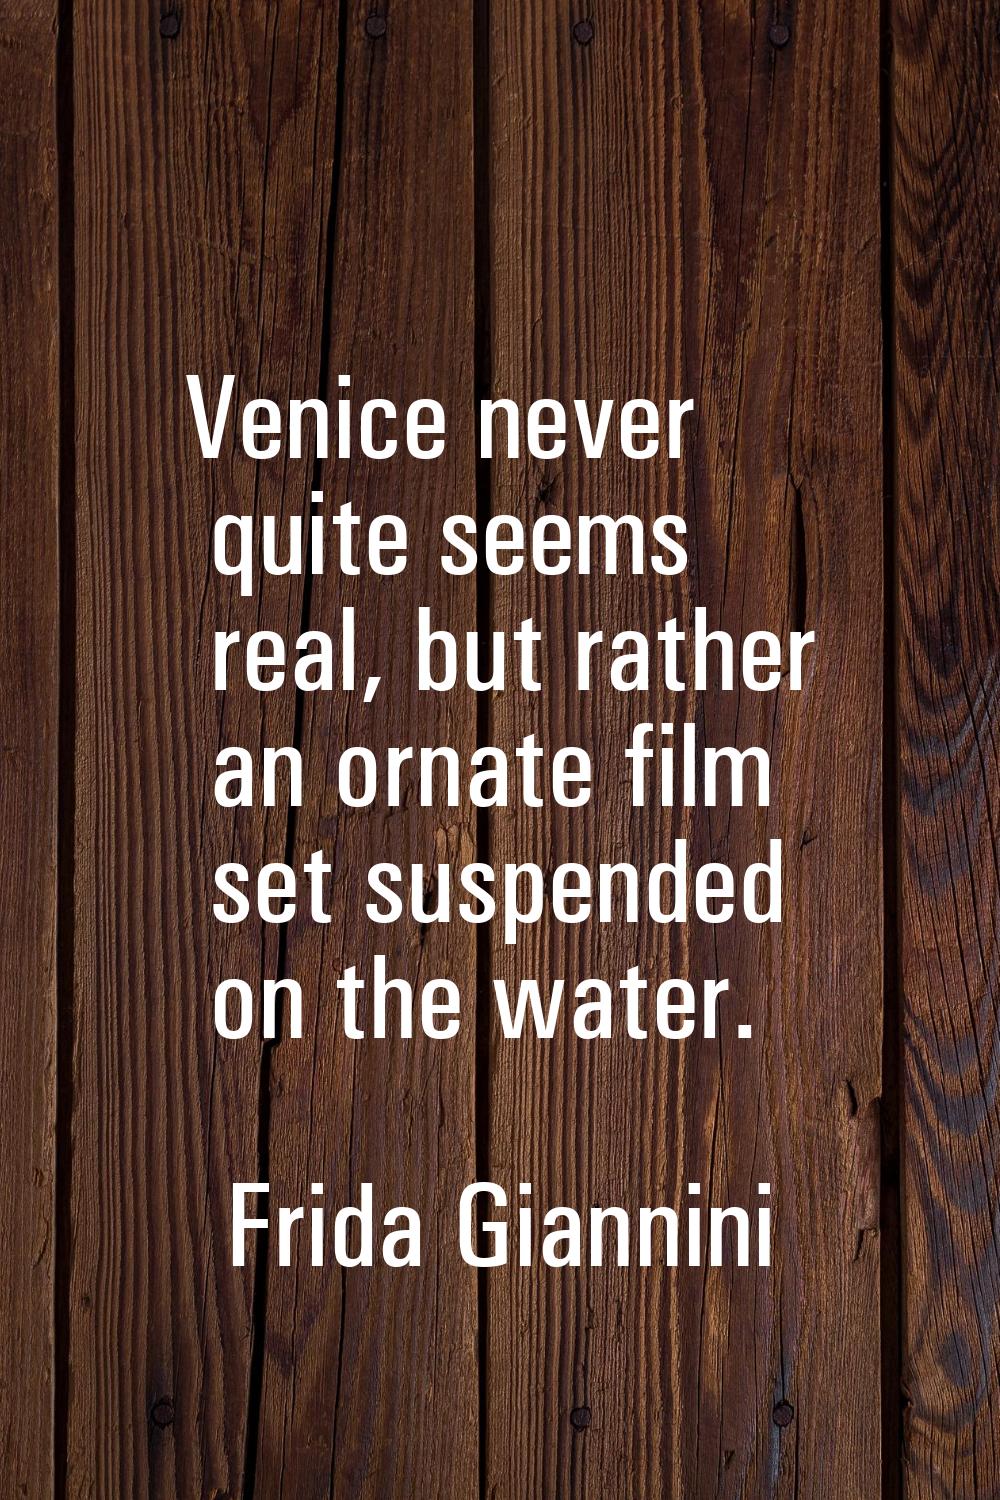 Venice never quite seems real, but rather an ornate film set suspended on the water.